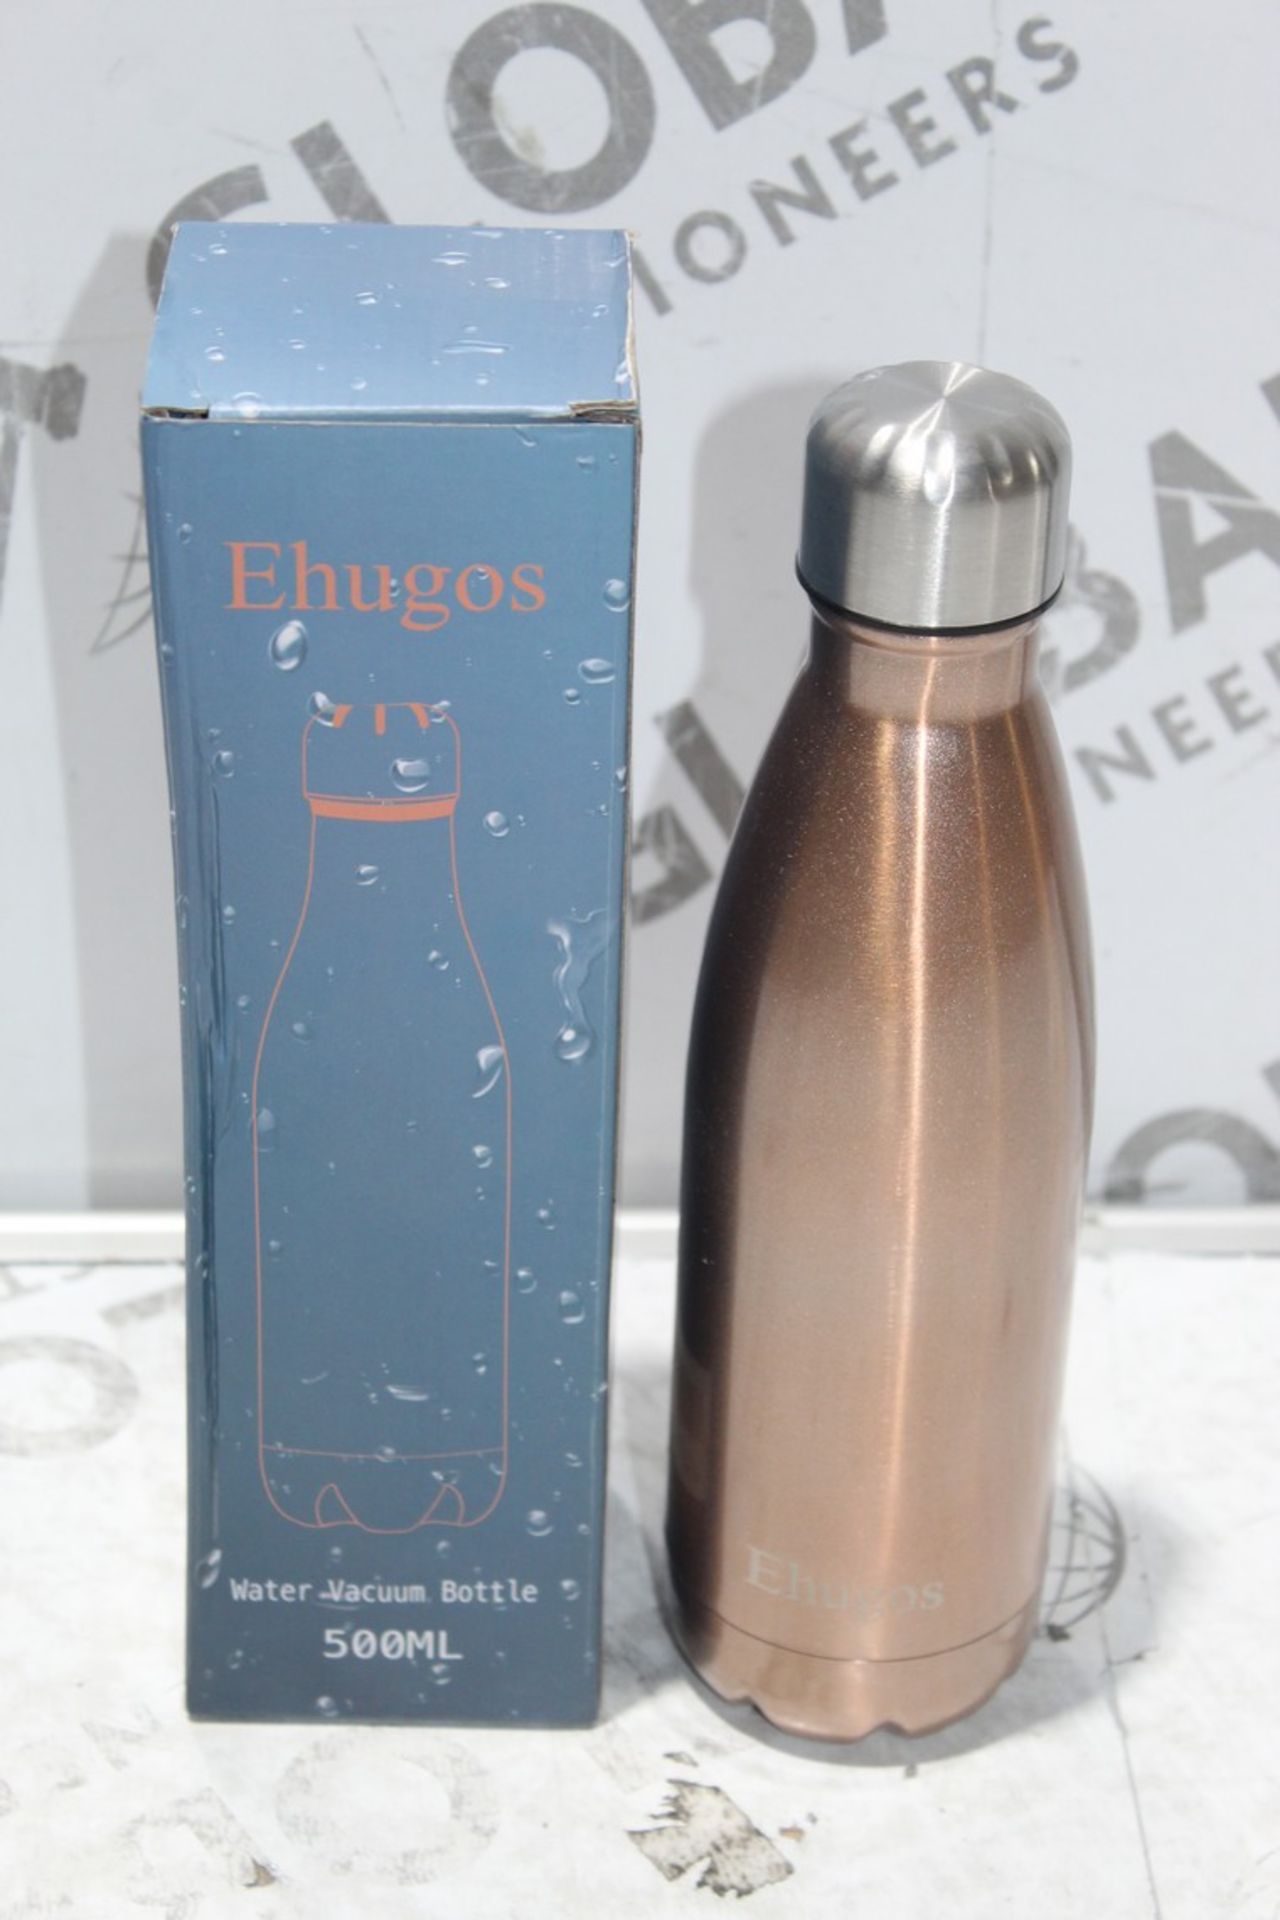 Assorted Brand-New, Ehugos, 500ml Vacuumed Water Bottles, RRP£16.99 (Public Viewing and Appraisals